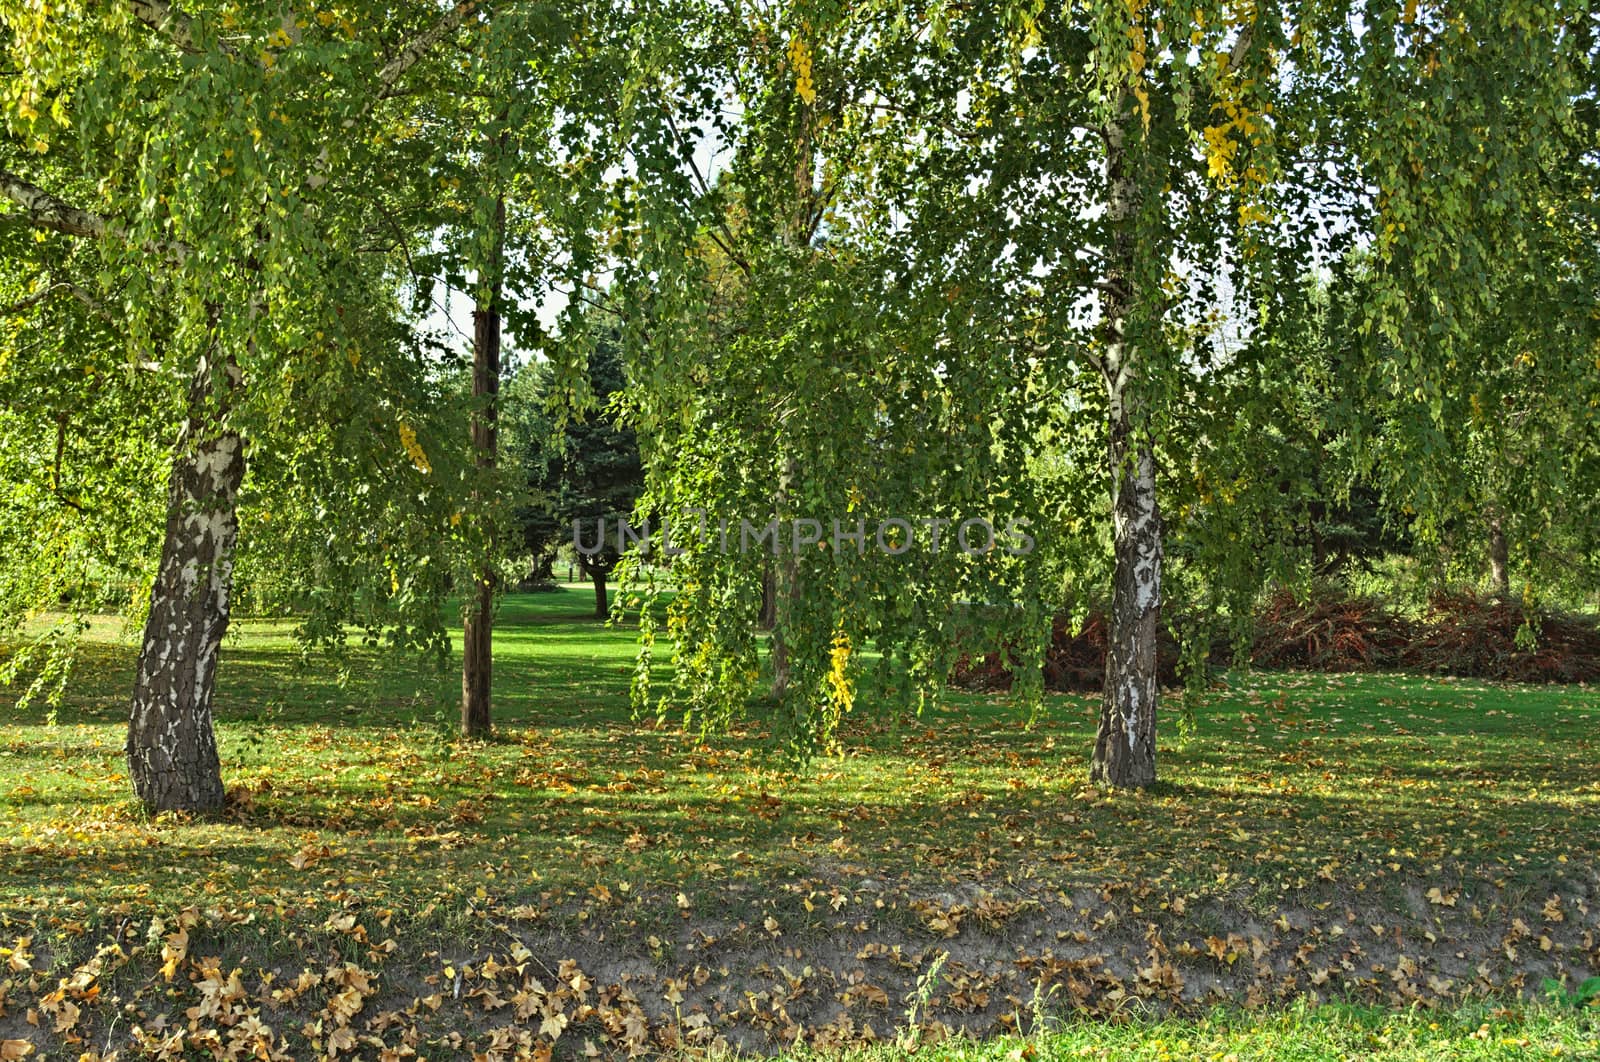 View at park in early autumn